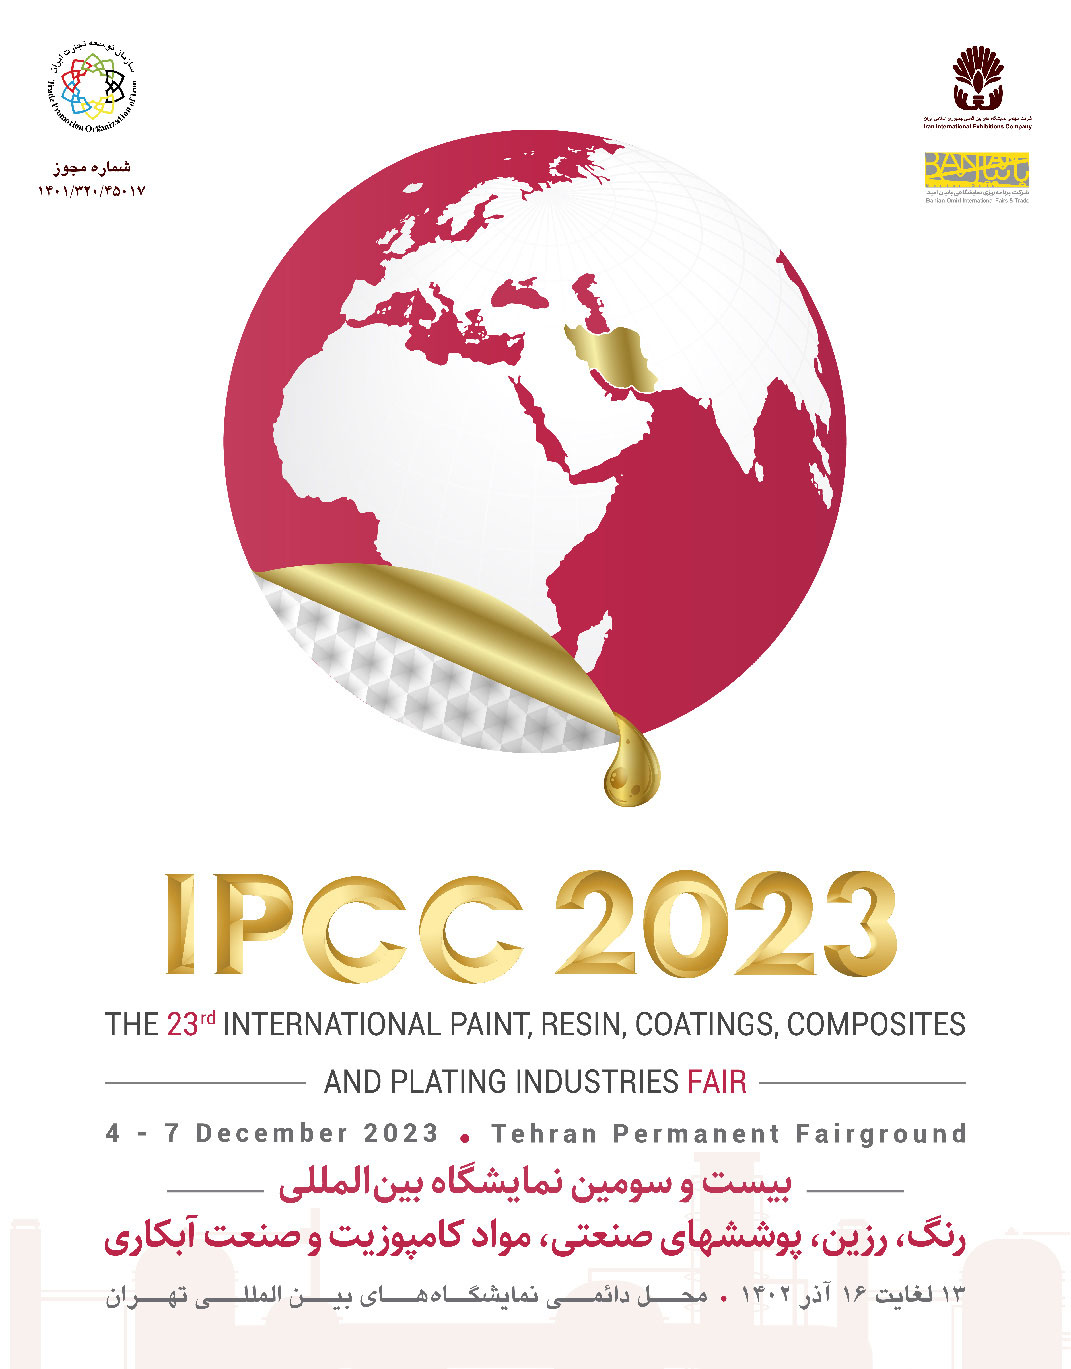 23rd IPCC 2023 Poster 2 - The 23rd International Paint and Resin (IPCC) Exhibition 2023 in Iran/Tehran